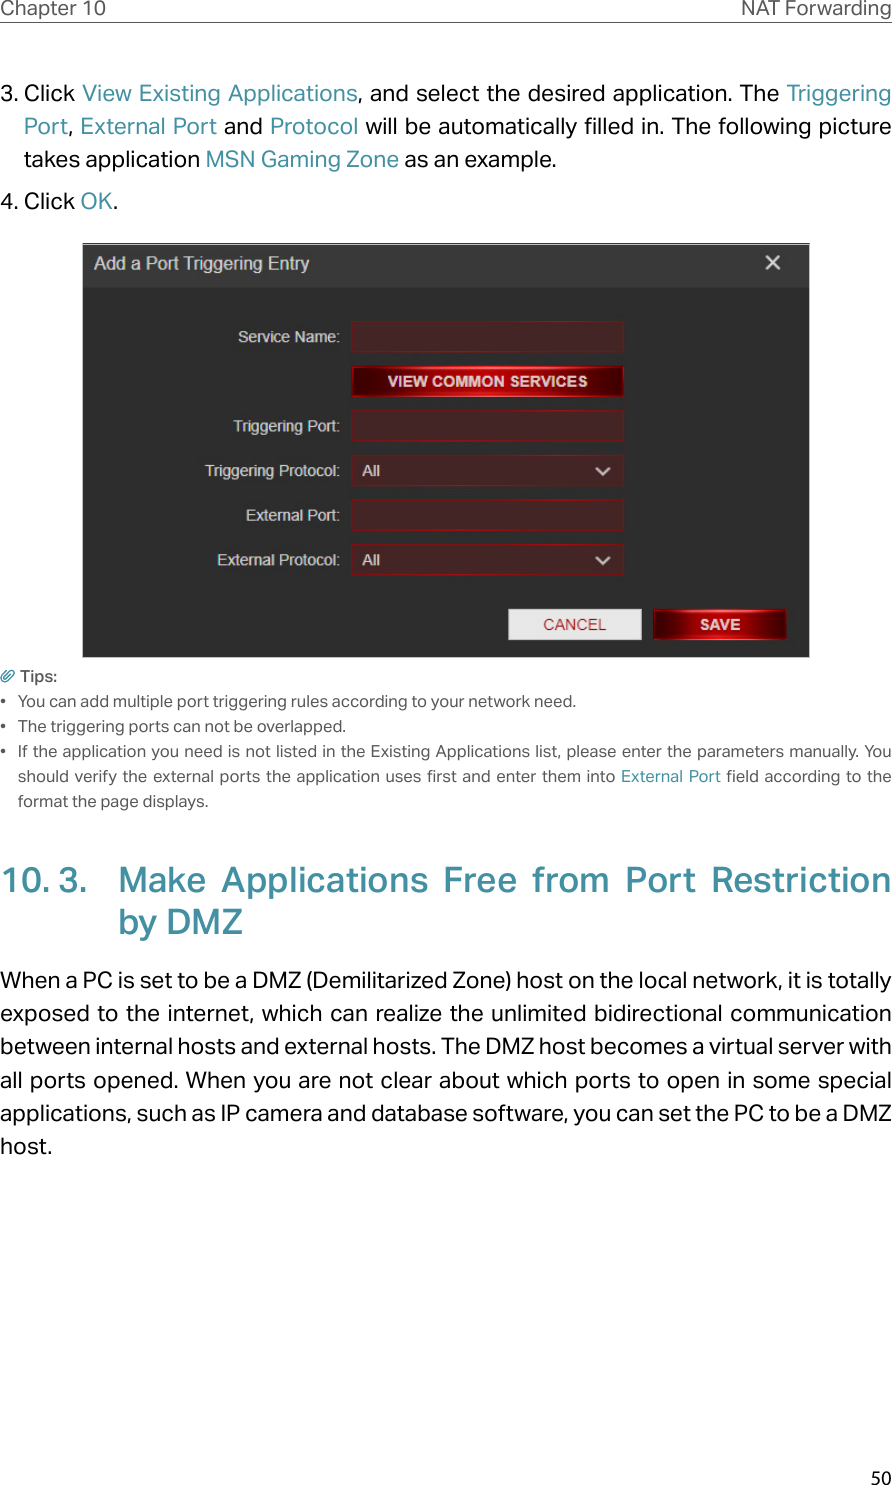 50Chapter 10 NAT Forwarding3. Click View Existing Applications, and select the desired application. The Triggering Port, External Port and Protocol will be automatically filled in. The following picture takes application MSN Gaming Zone as an example.4. Click OK.Tips:•  You can add multiple port triggering rules according to your network need.•  The triggering ports can not be overlapped.•  If the application you need is not listed in the Existing Applications list, please enter the parameters manually. You should verify the external ports the application uses first and enter them into External Port field according to the format the page displays.10. 3.  Make Applications Free from Port Restriction by DMZWhen a PC is set to be a DMZ (Demilitarized Zone) host on the local network, it is totally exposed to the internet, which can realize the unlimited bidirectional communication between internal hosts and external hosts. The DMZ host becomes a virtual server with all ports opened. When you are not clear about which ports to open in some special applications, such as IP camera and database software, you can set the PC to be a DMZ host.